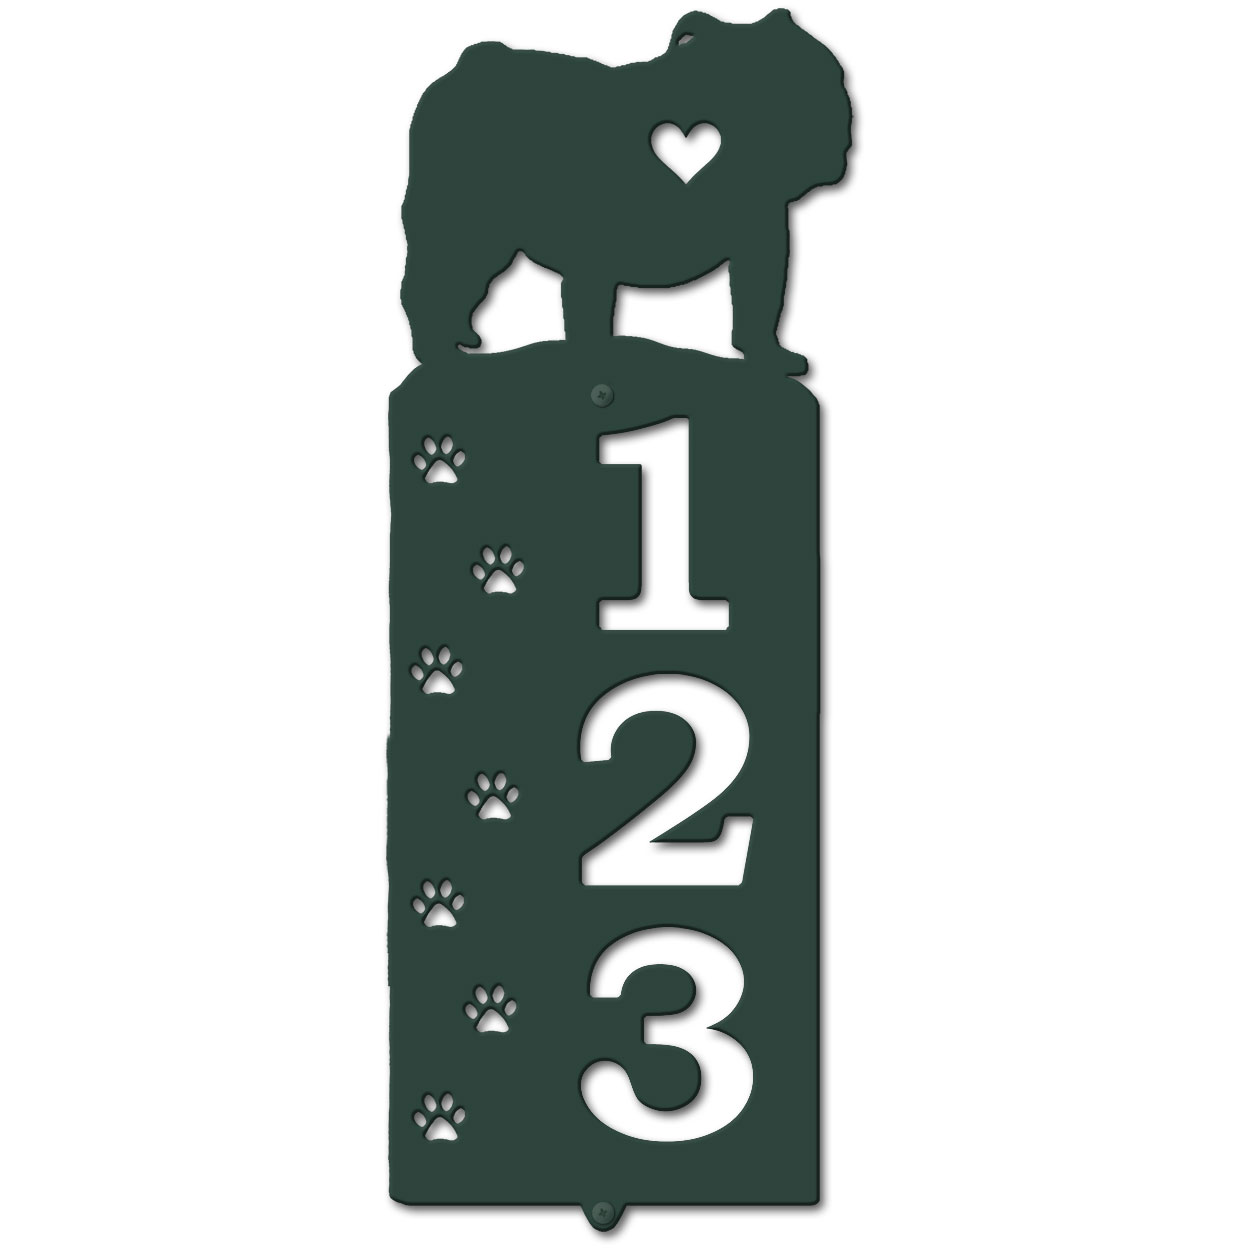 636203 - English Bulldog Cut-Outs Three Digit Address Number Plaque - Choose Size and Color